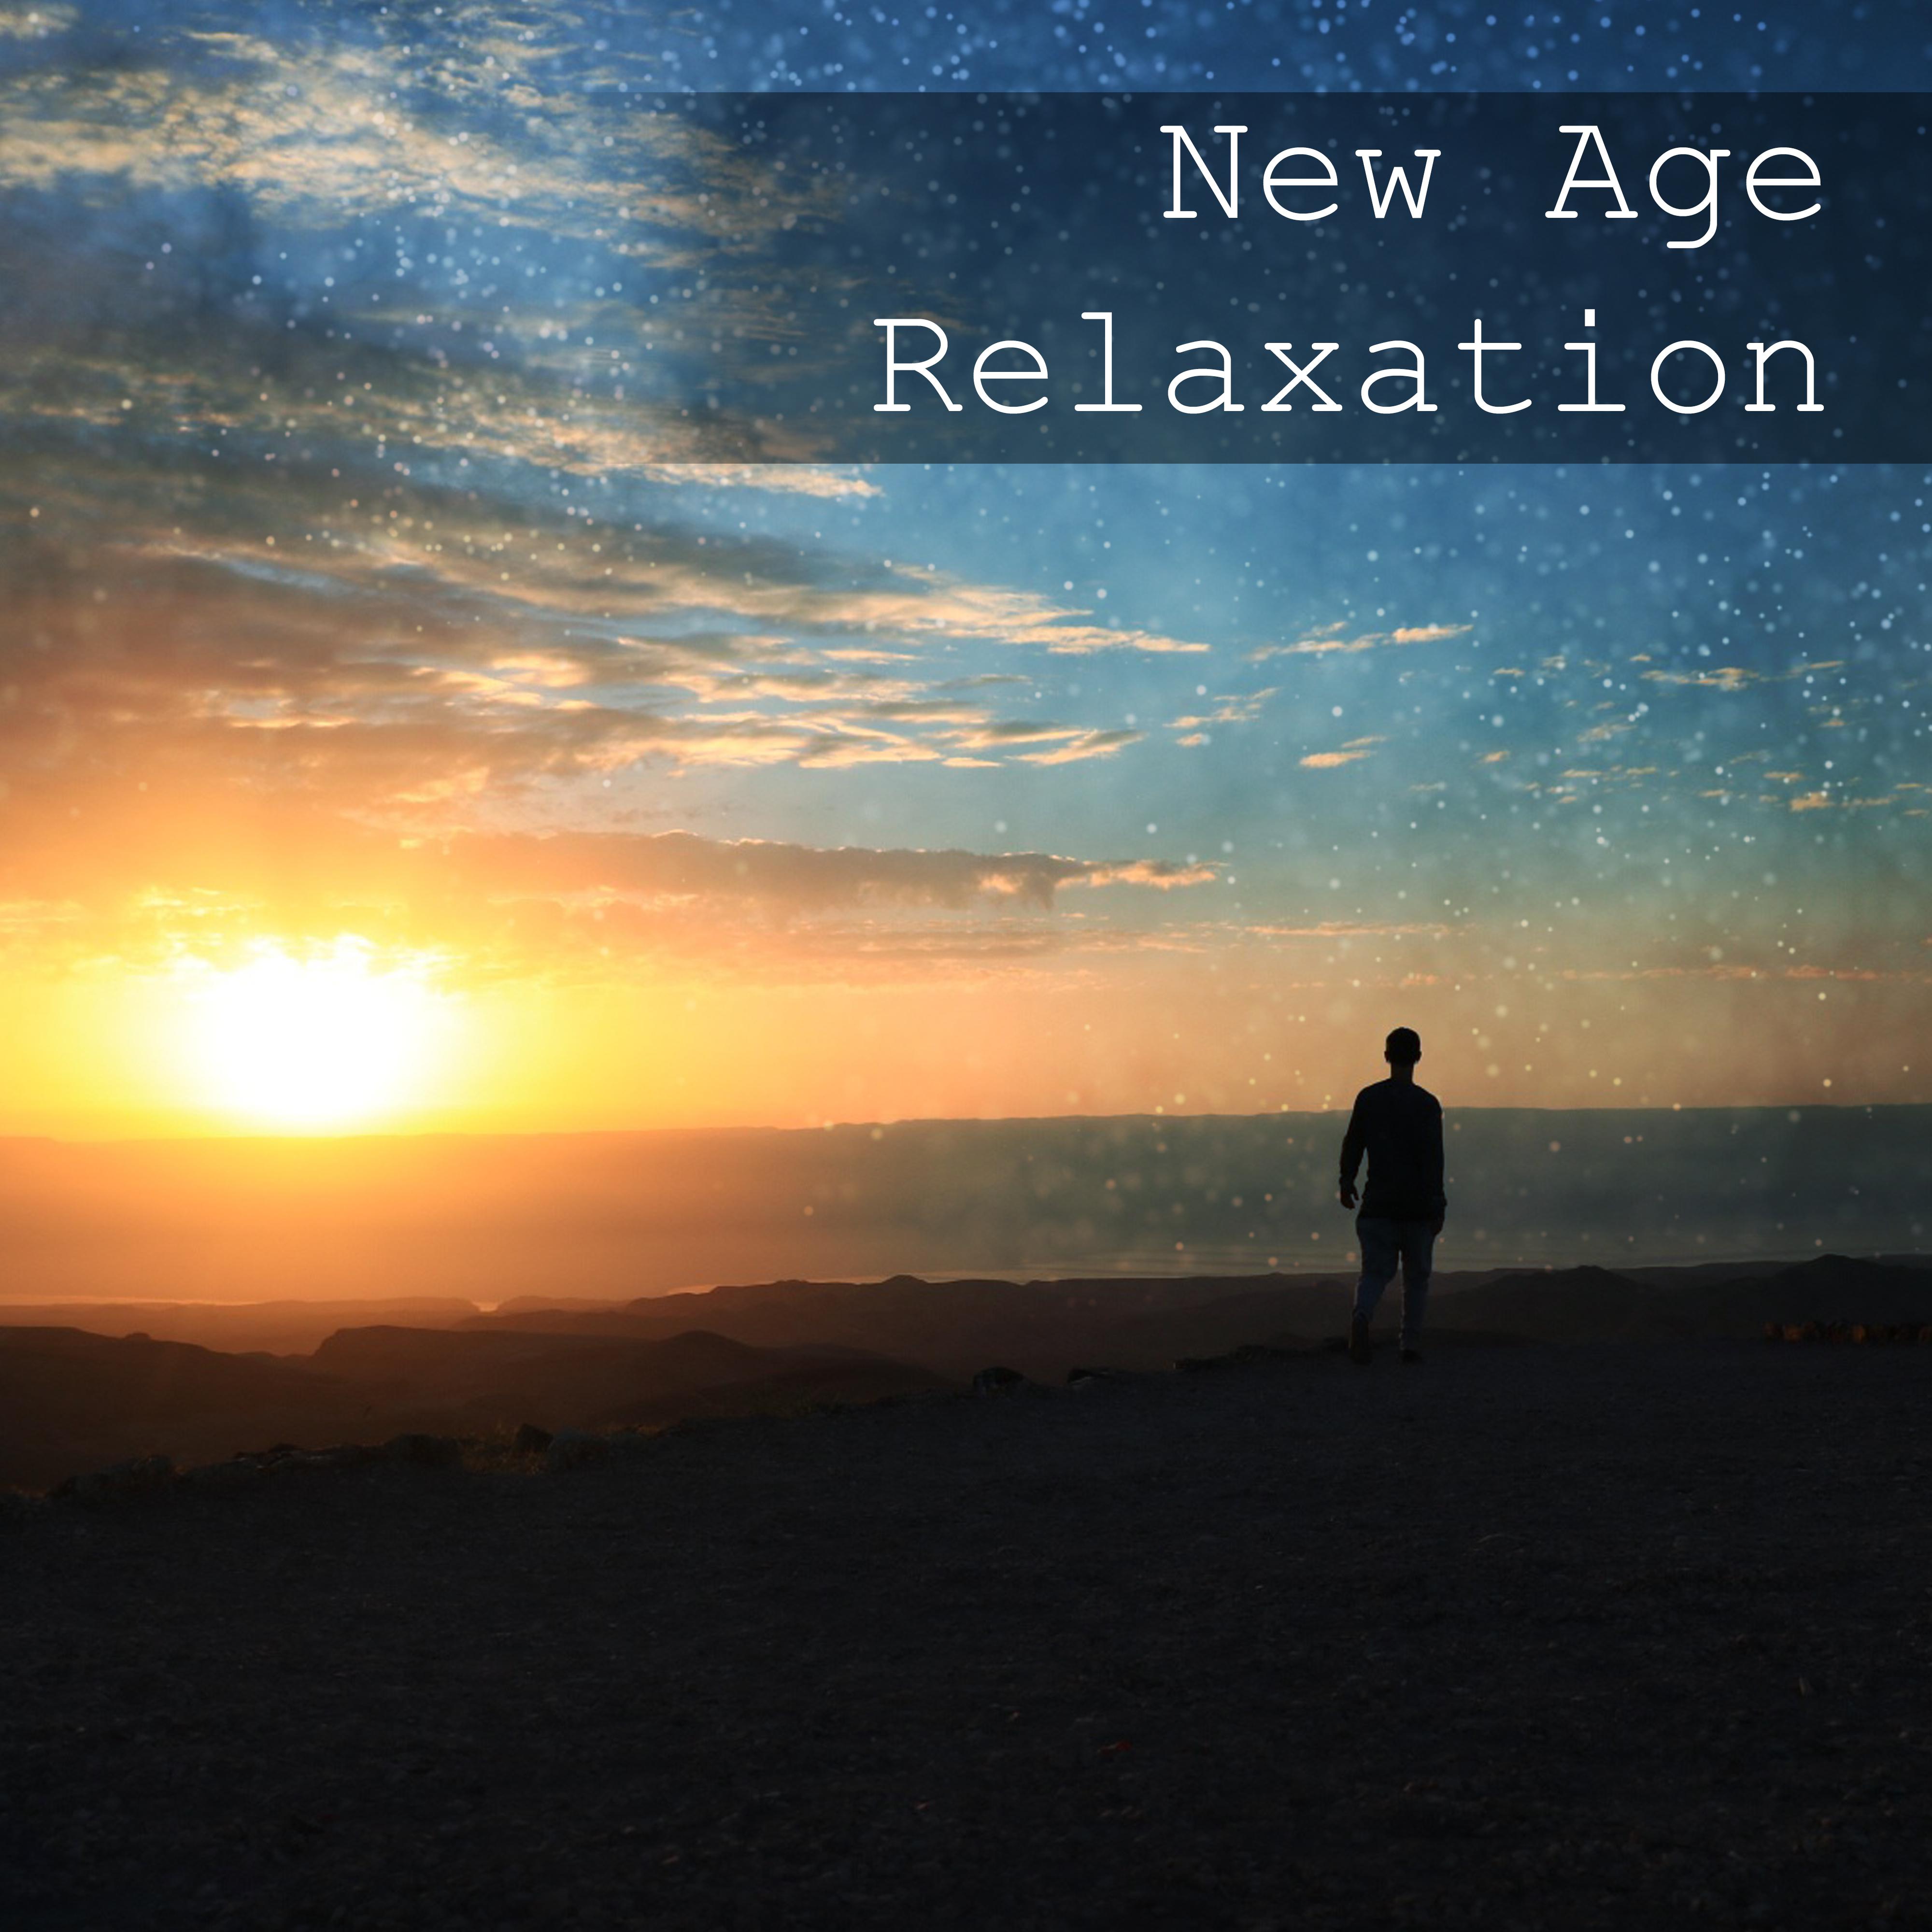 New Age Relaxation  Soft Music to Calm Down, Stress Relief, Soothing Piano, Peaceful Nature Sounds for Relaxation, Pure Waves, Singing Birds, Rest